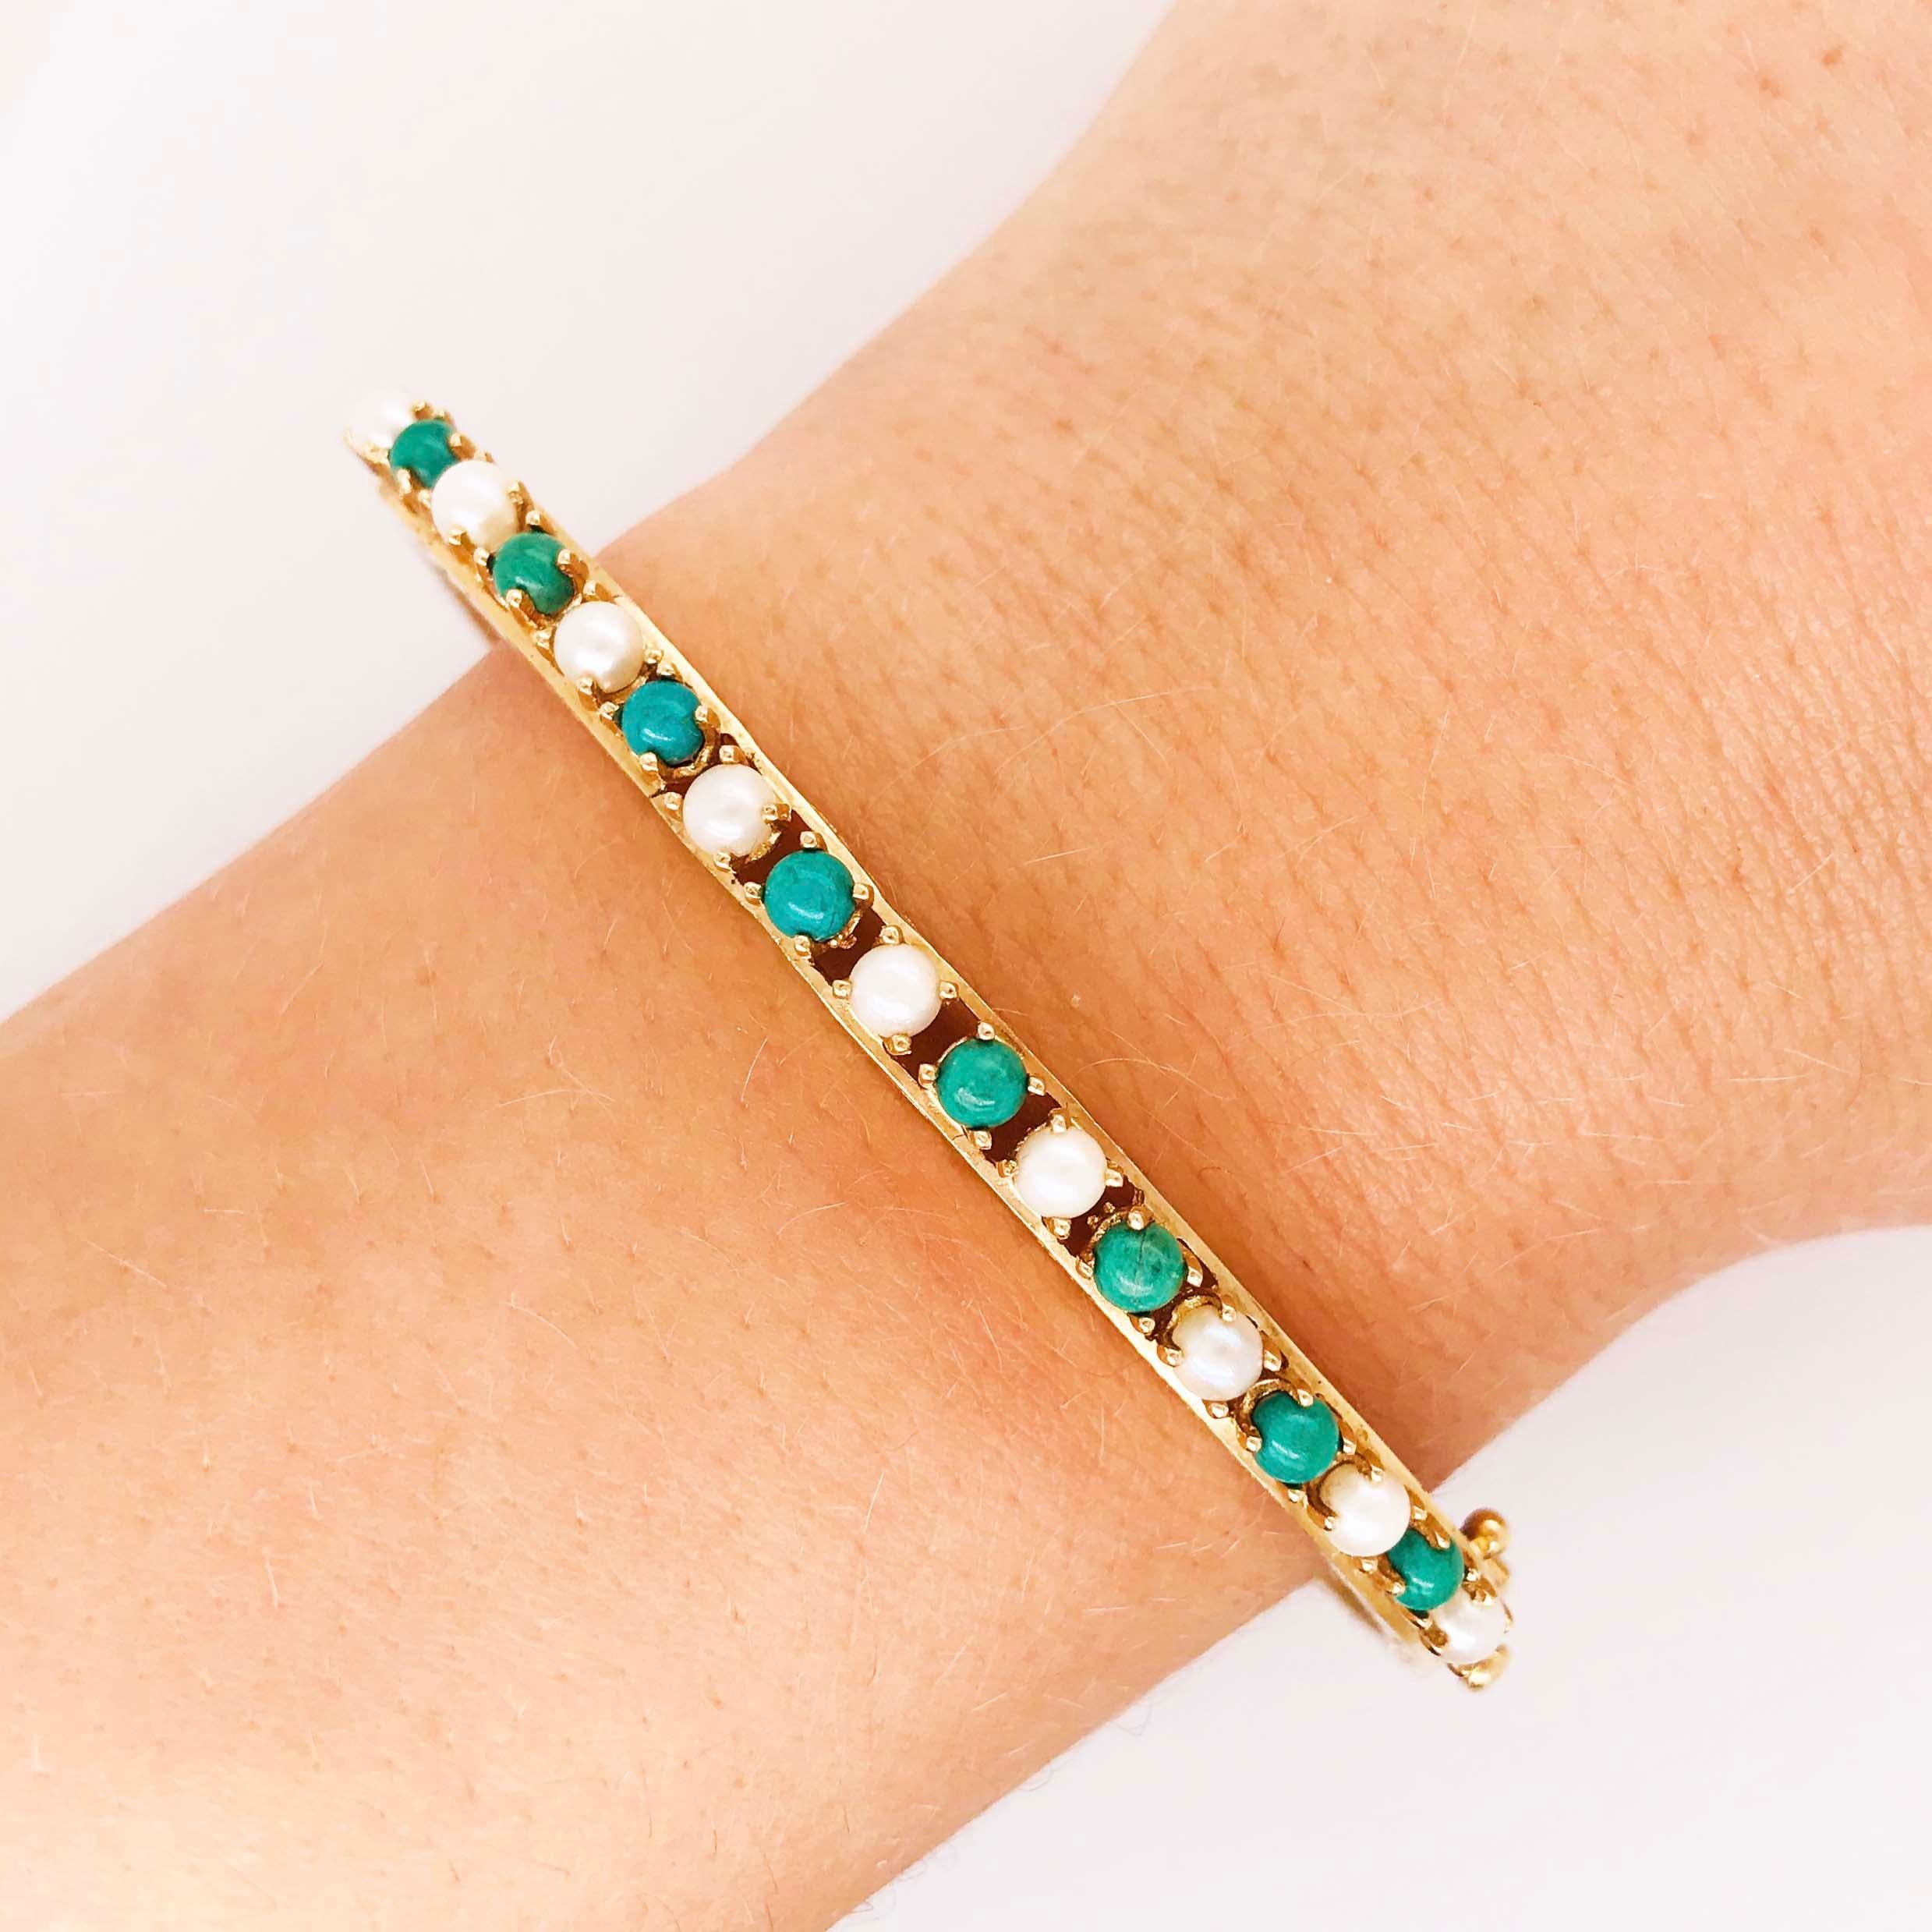 This antique bangle bracelet is a special piece. This piece was custom made by hand and is original with genuine cultures pearls and genuine amazonite and precious metal, 14K yellow gold. The handmade pearl and amazonite bangle is an oval bangle